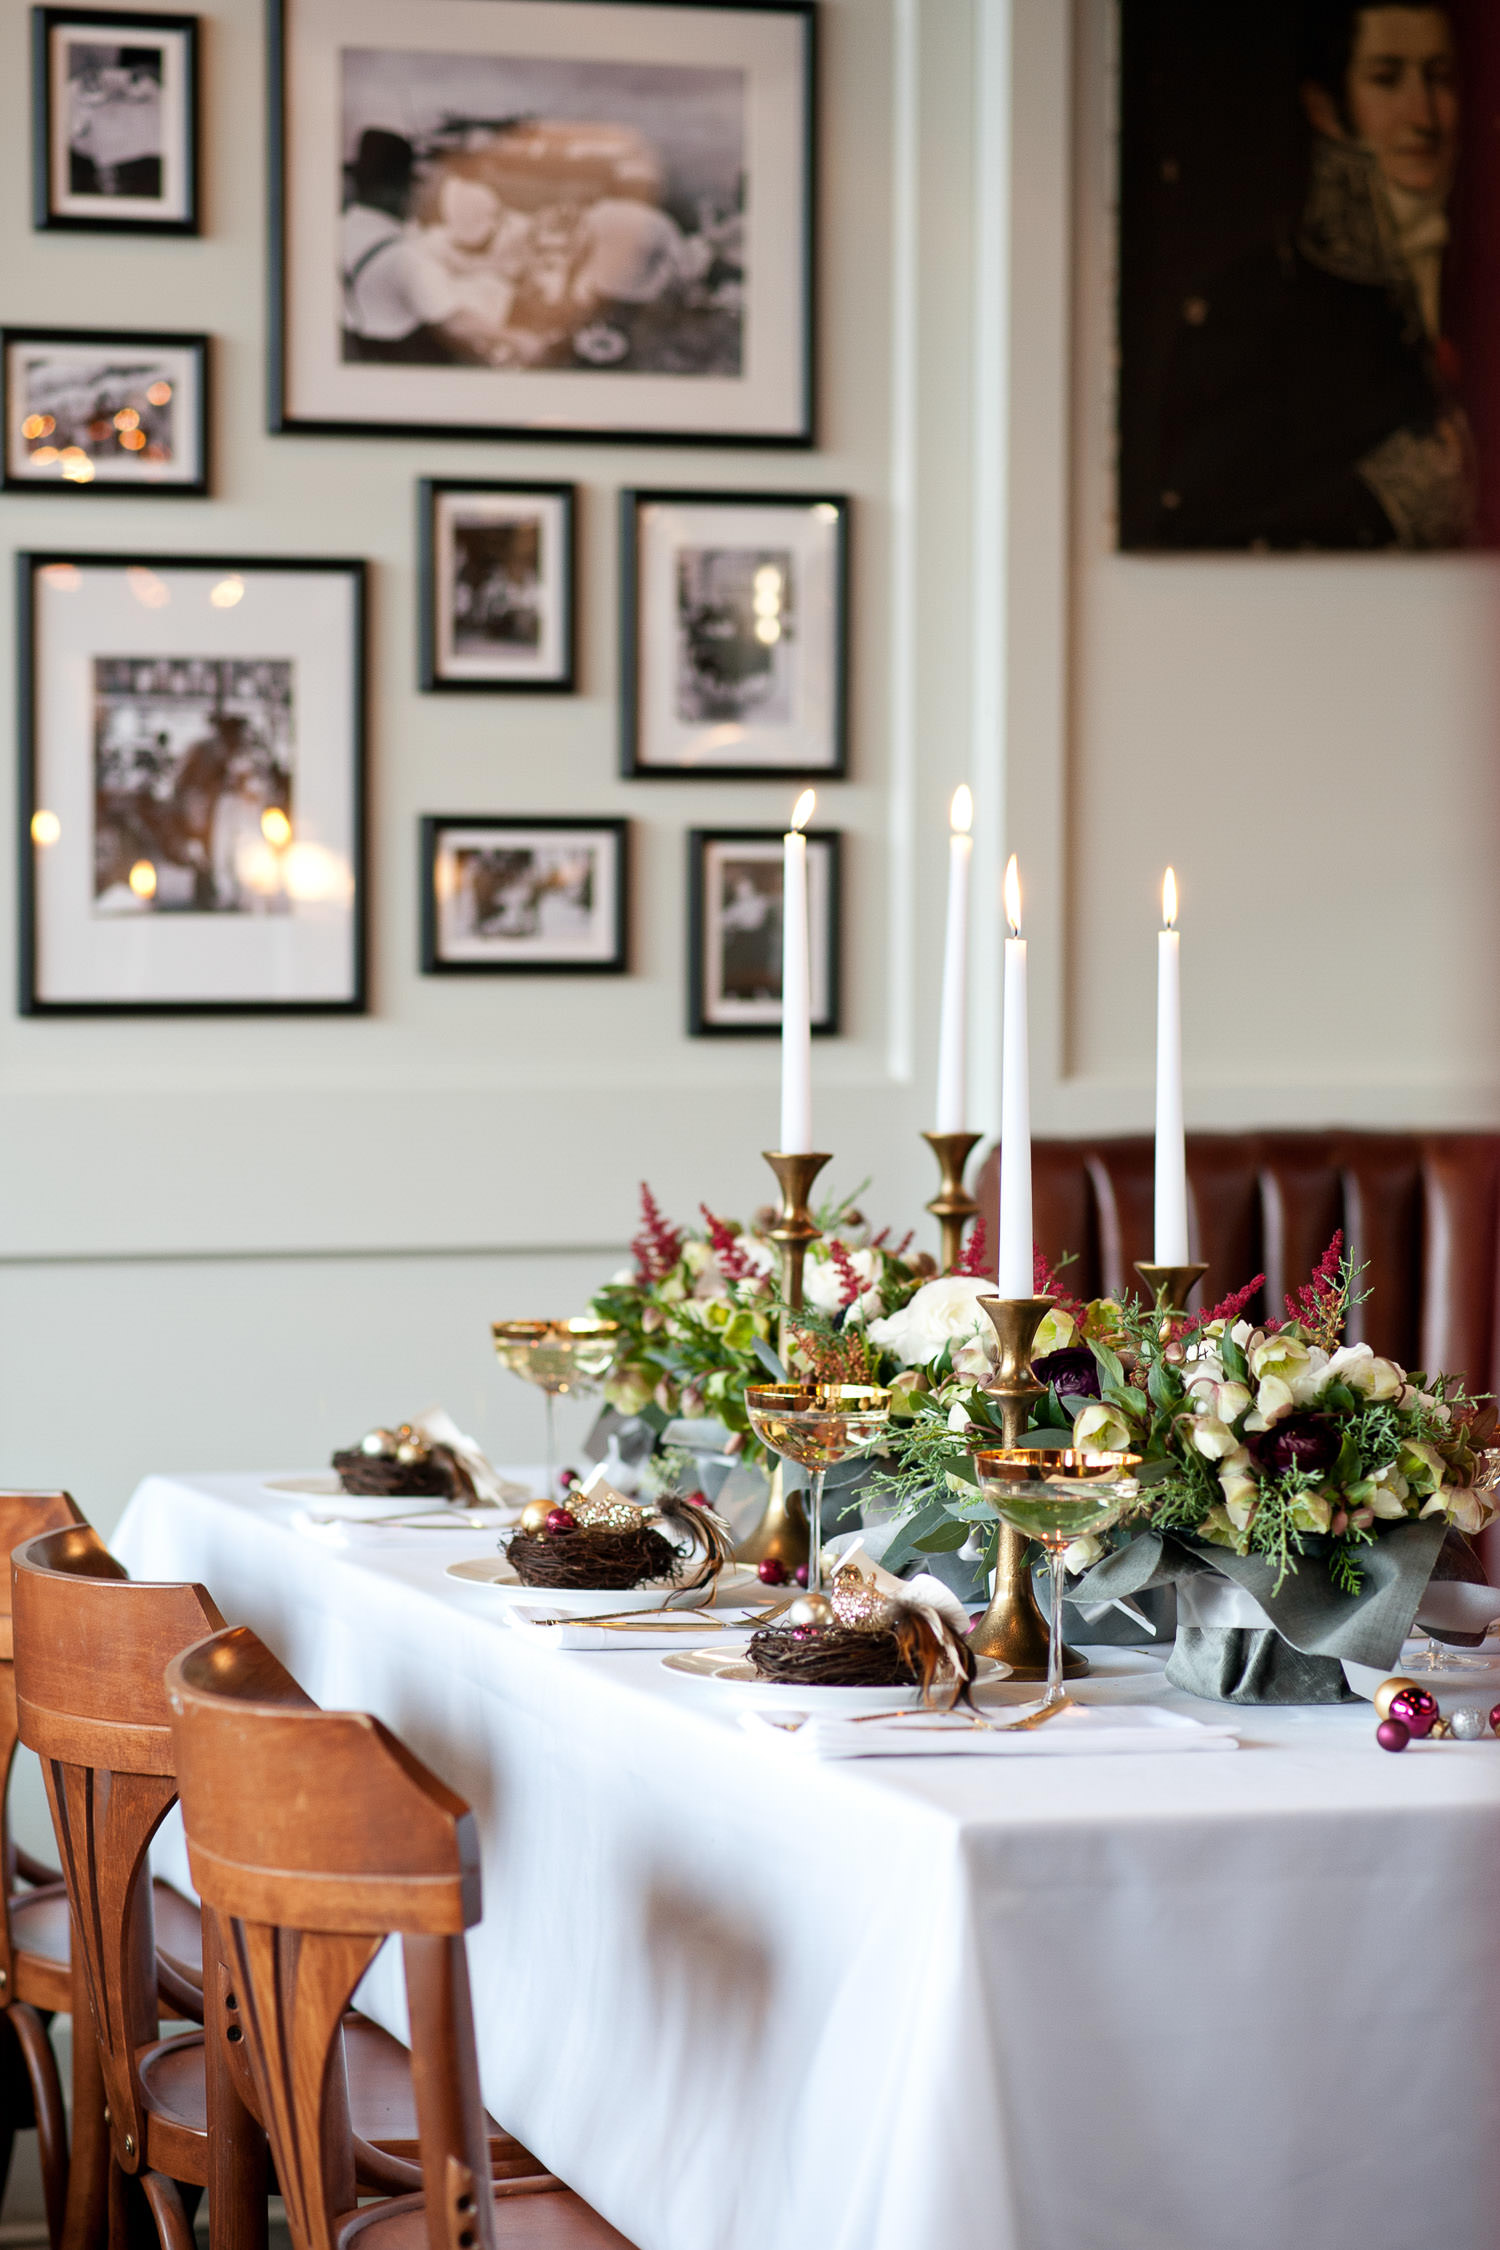 Festive tabletop for Christmas captured by Tara Whittaker Photography